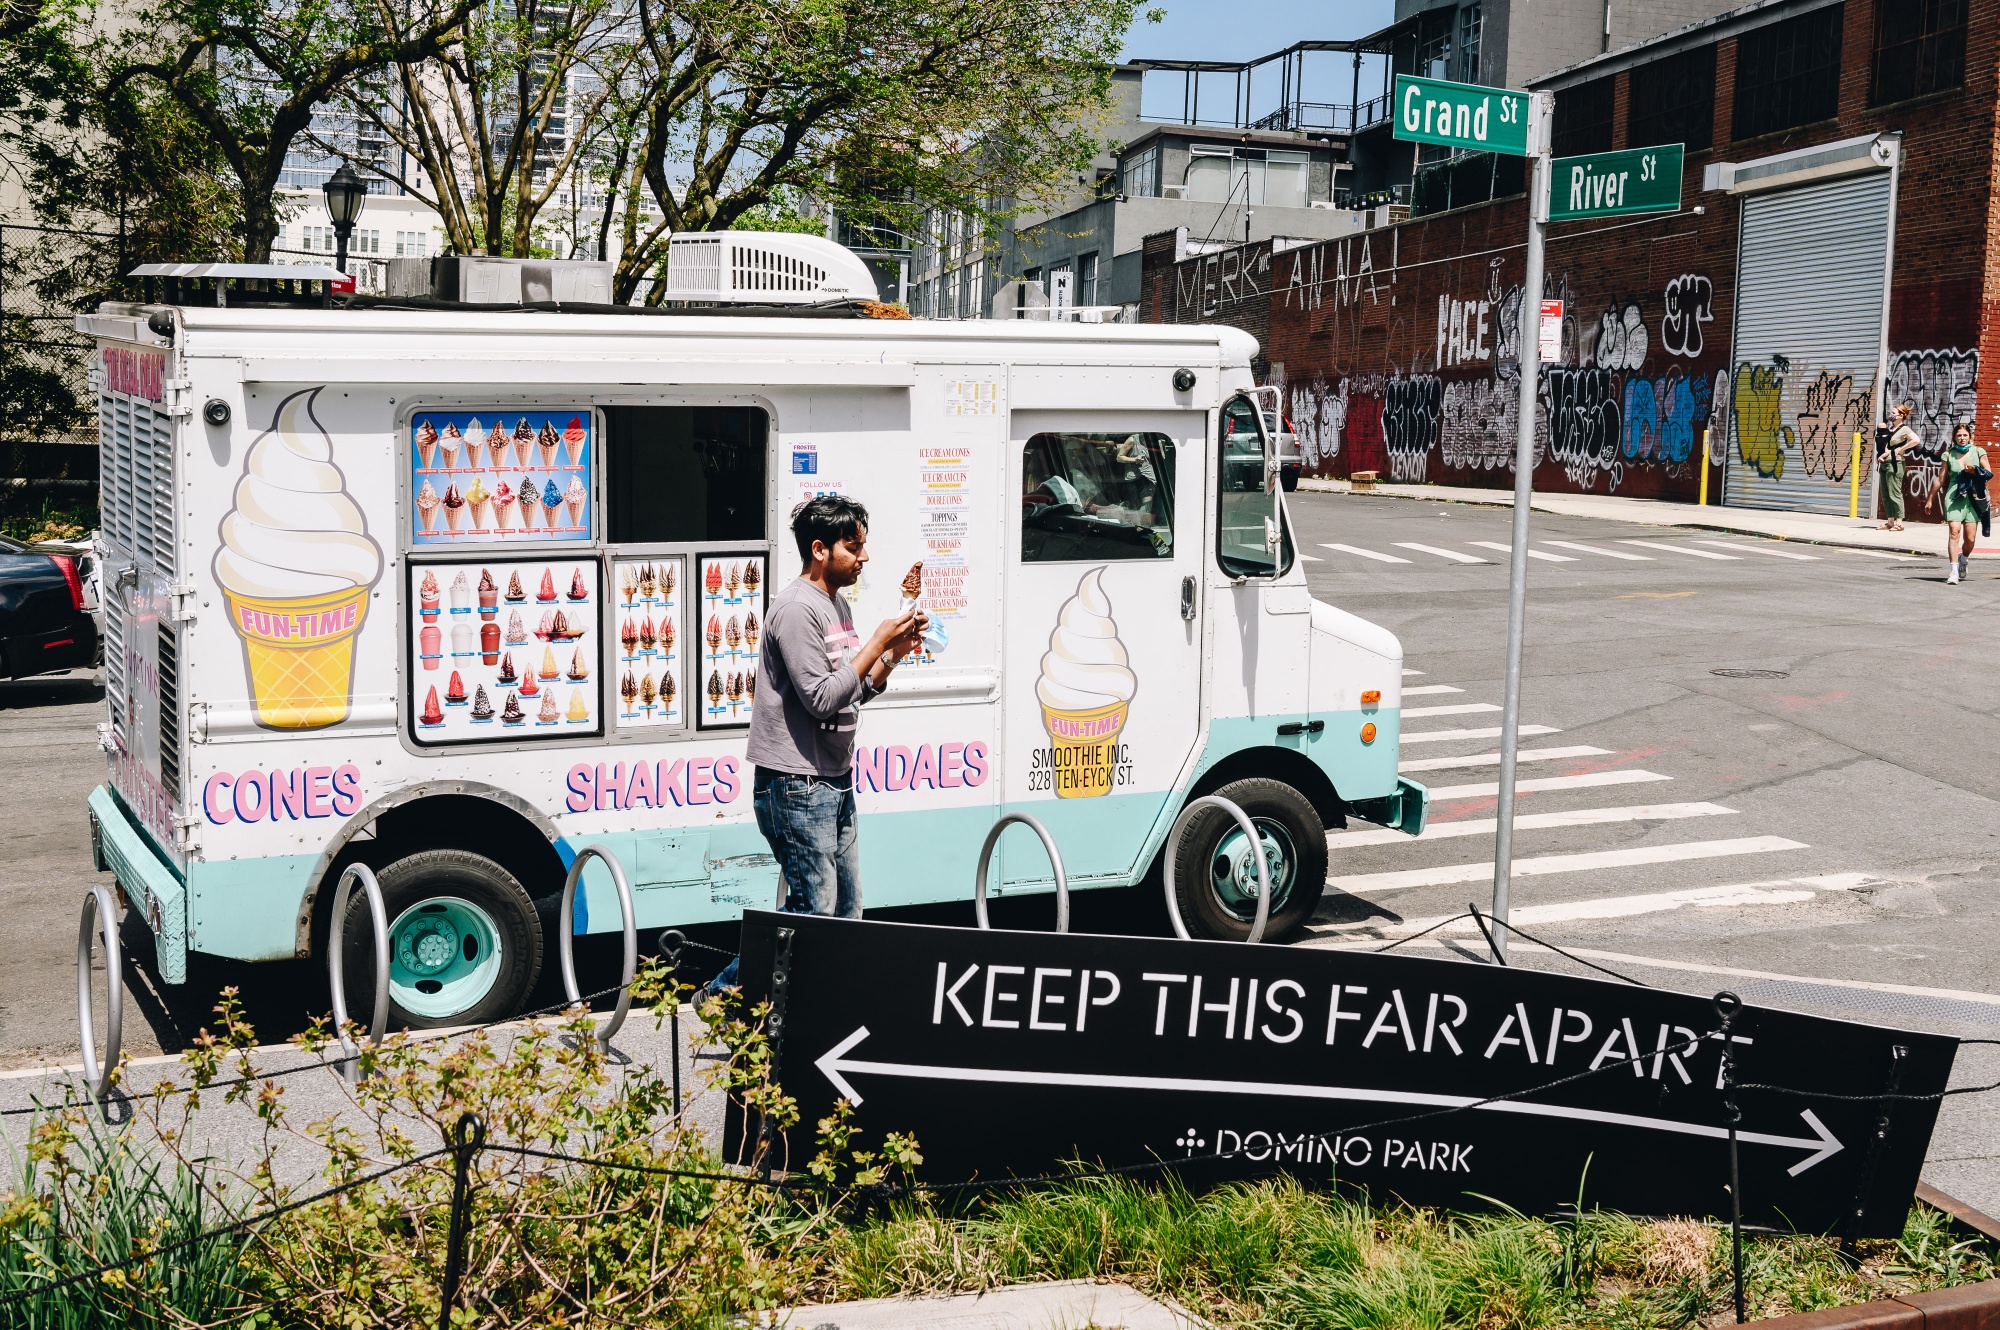 A person purchases an ice cream cone from a food truck at Domino Park in the Brooklyn Borough of New York, U.S., on Friday, May 15, 2020. Mayor Bill de Blasio says the city along with the NYPD will be launching a pilot program in public parks this weekend to monitor crowds and ensure people are practicing social distancing.